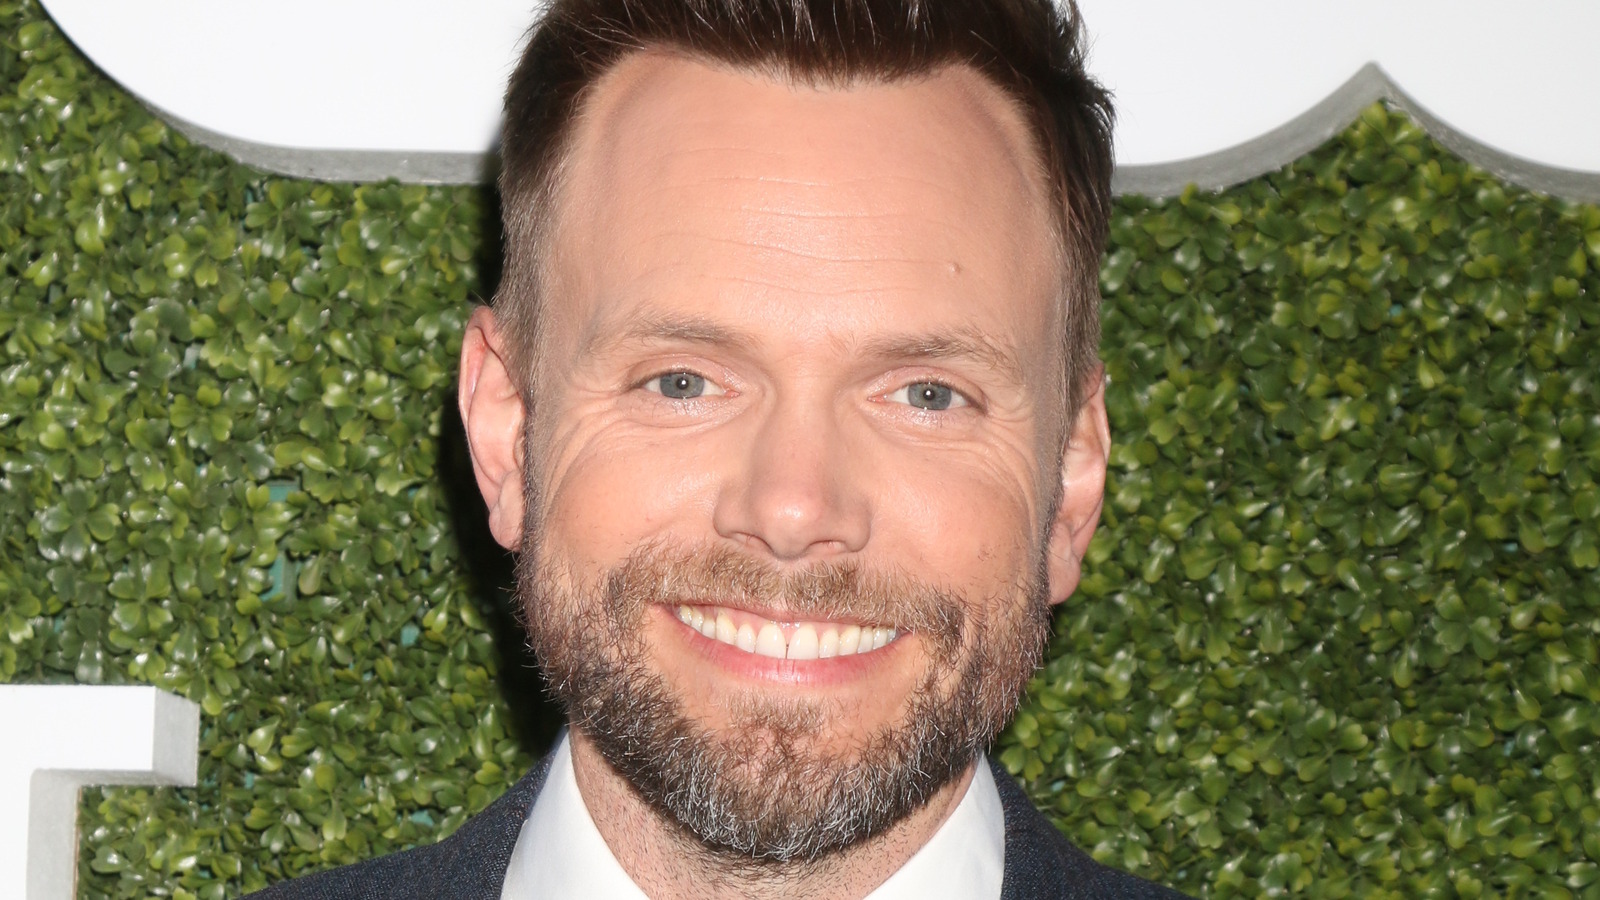 Joel McHale Opens Up About The Wild West Of 2000s Reality TV – Exclusive